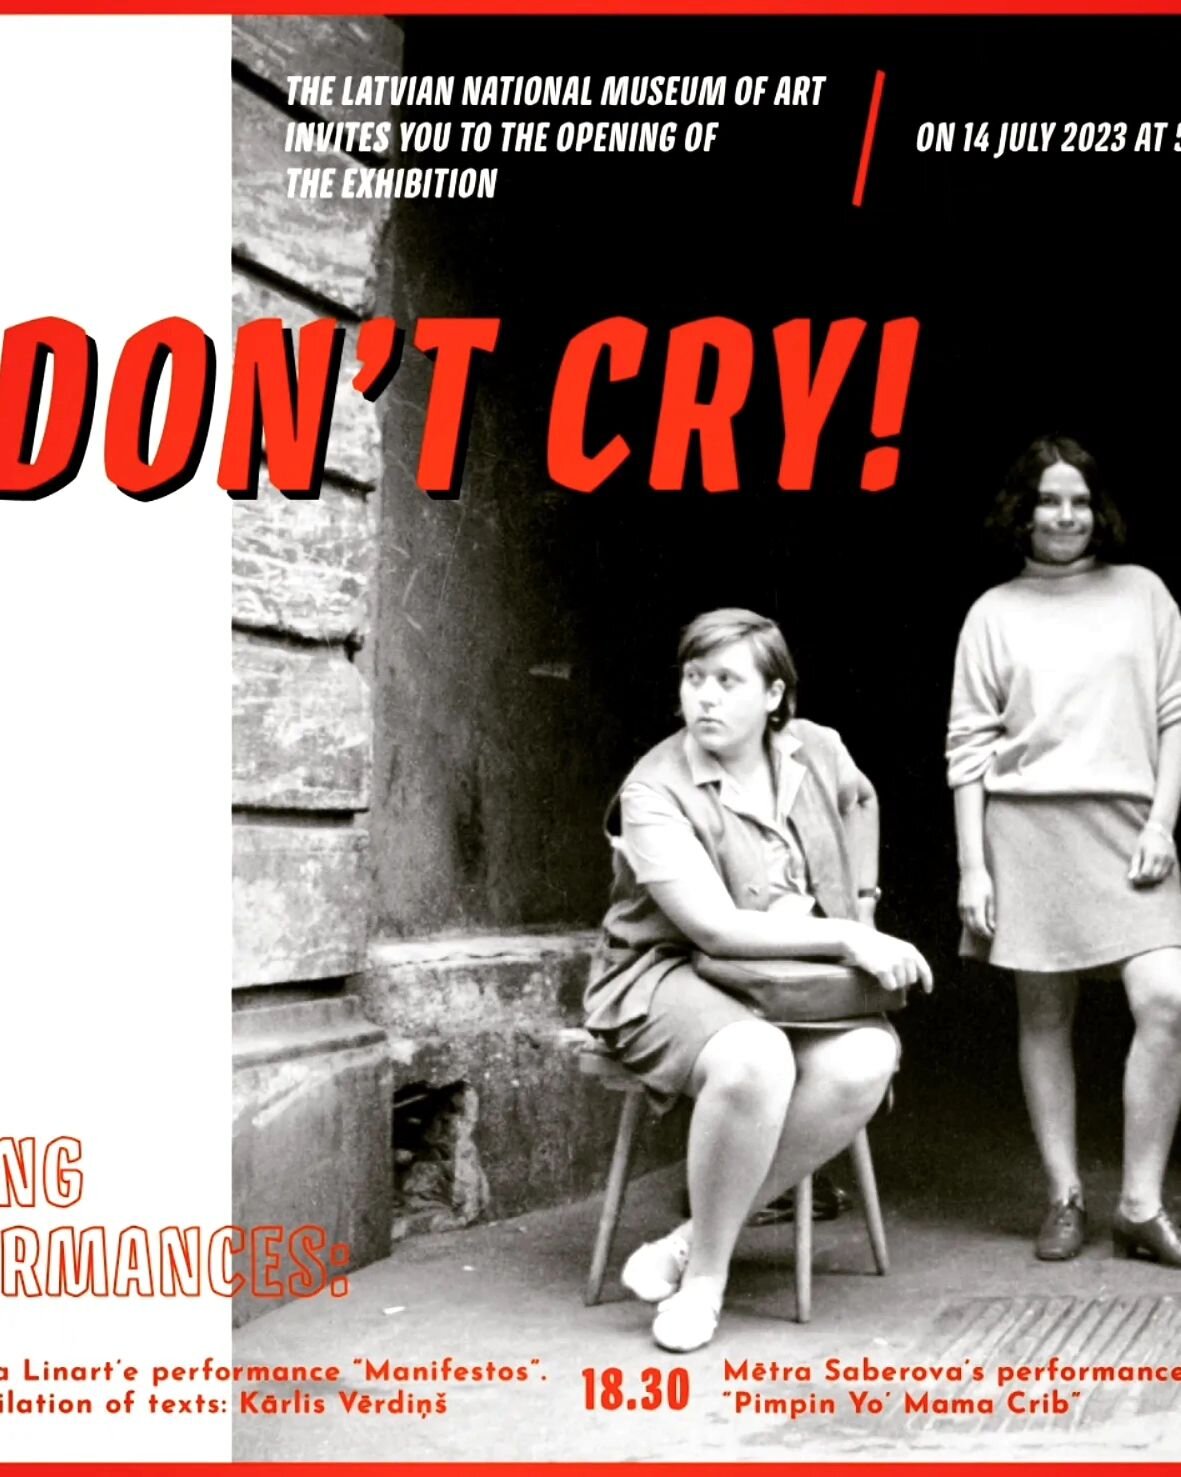 This is the post that got censored by Instagram:

Zenta Dzividzinska&rsquo;s @artdaysforever vintage prints are included in a group exhibition entitled Don&rsquo;t Cry! Feminist Perspectives in Latvian Art: 1965&ndash;2023 at the Latvian National Mus